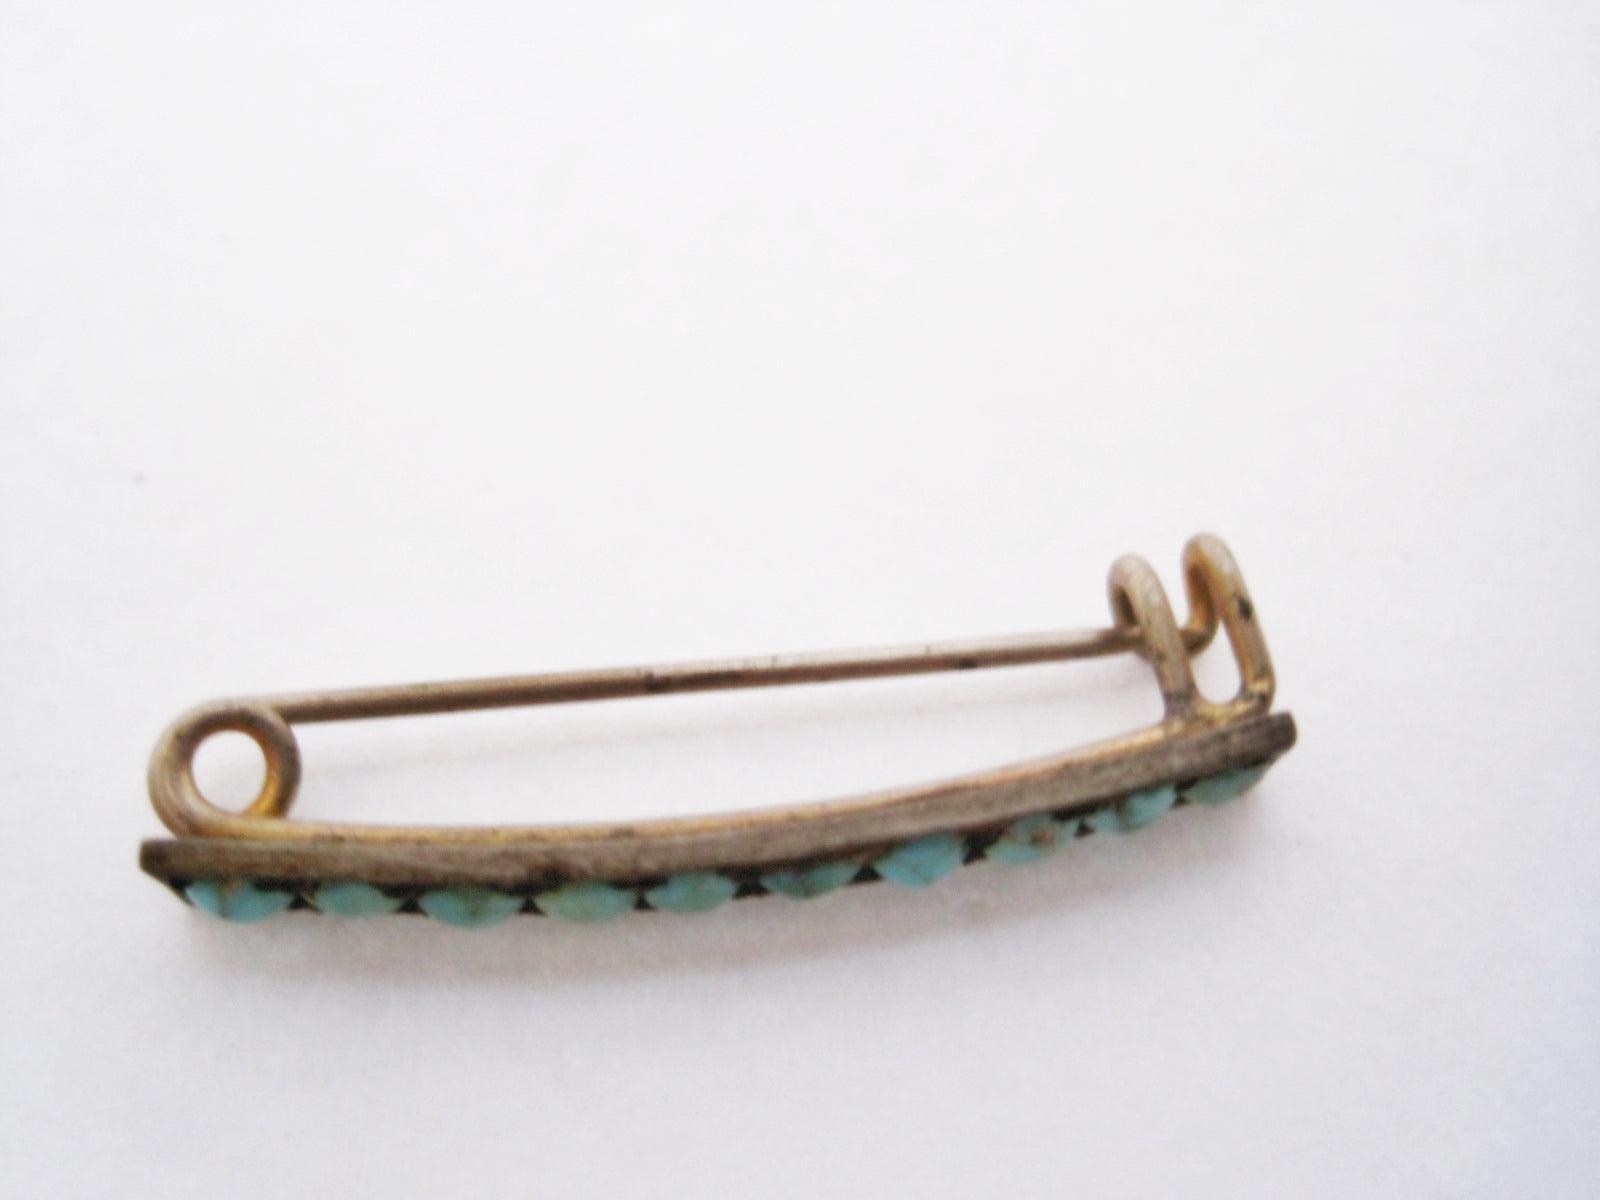 Antique Victorian Silver and Turquoise Bar Brooch or Pin - Anteeka